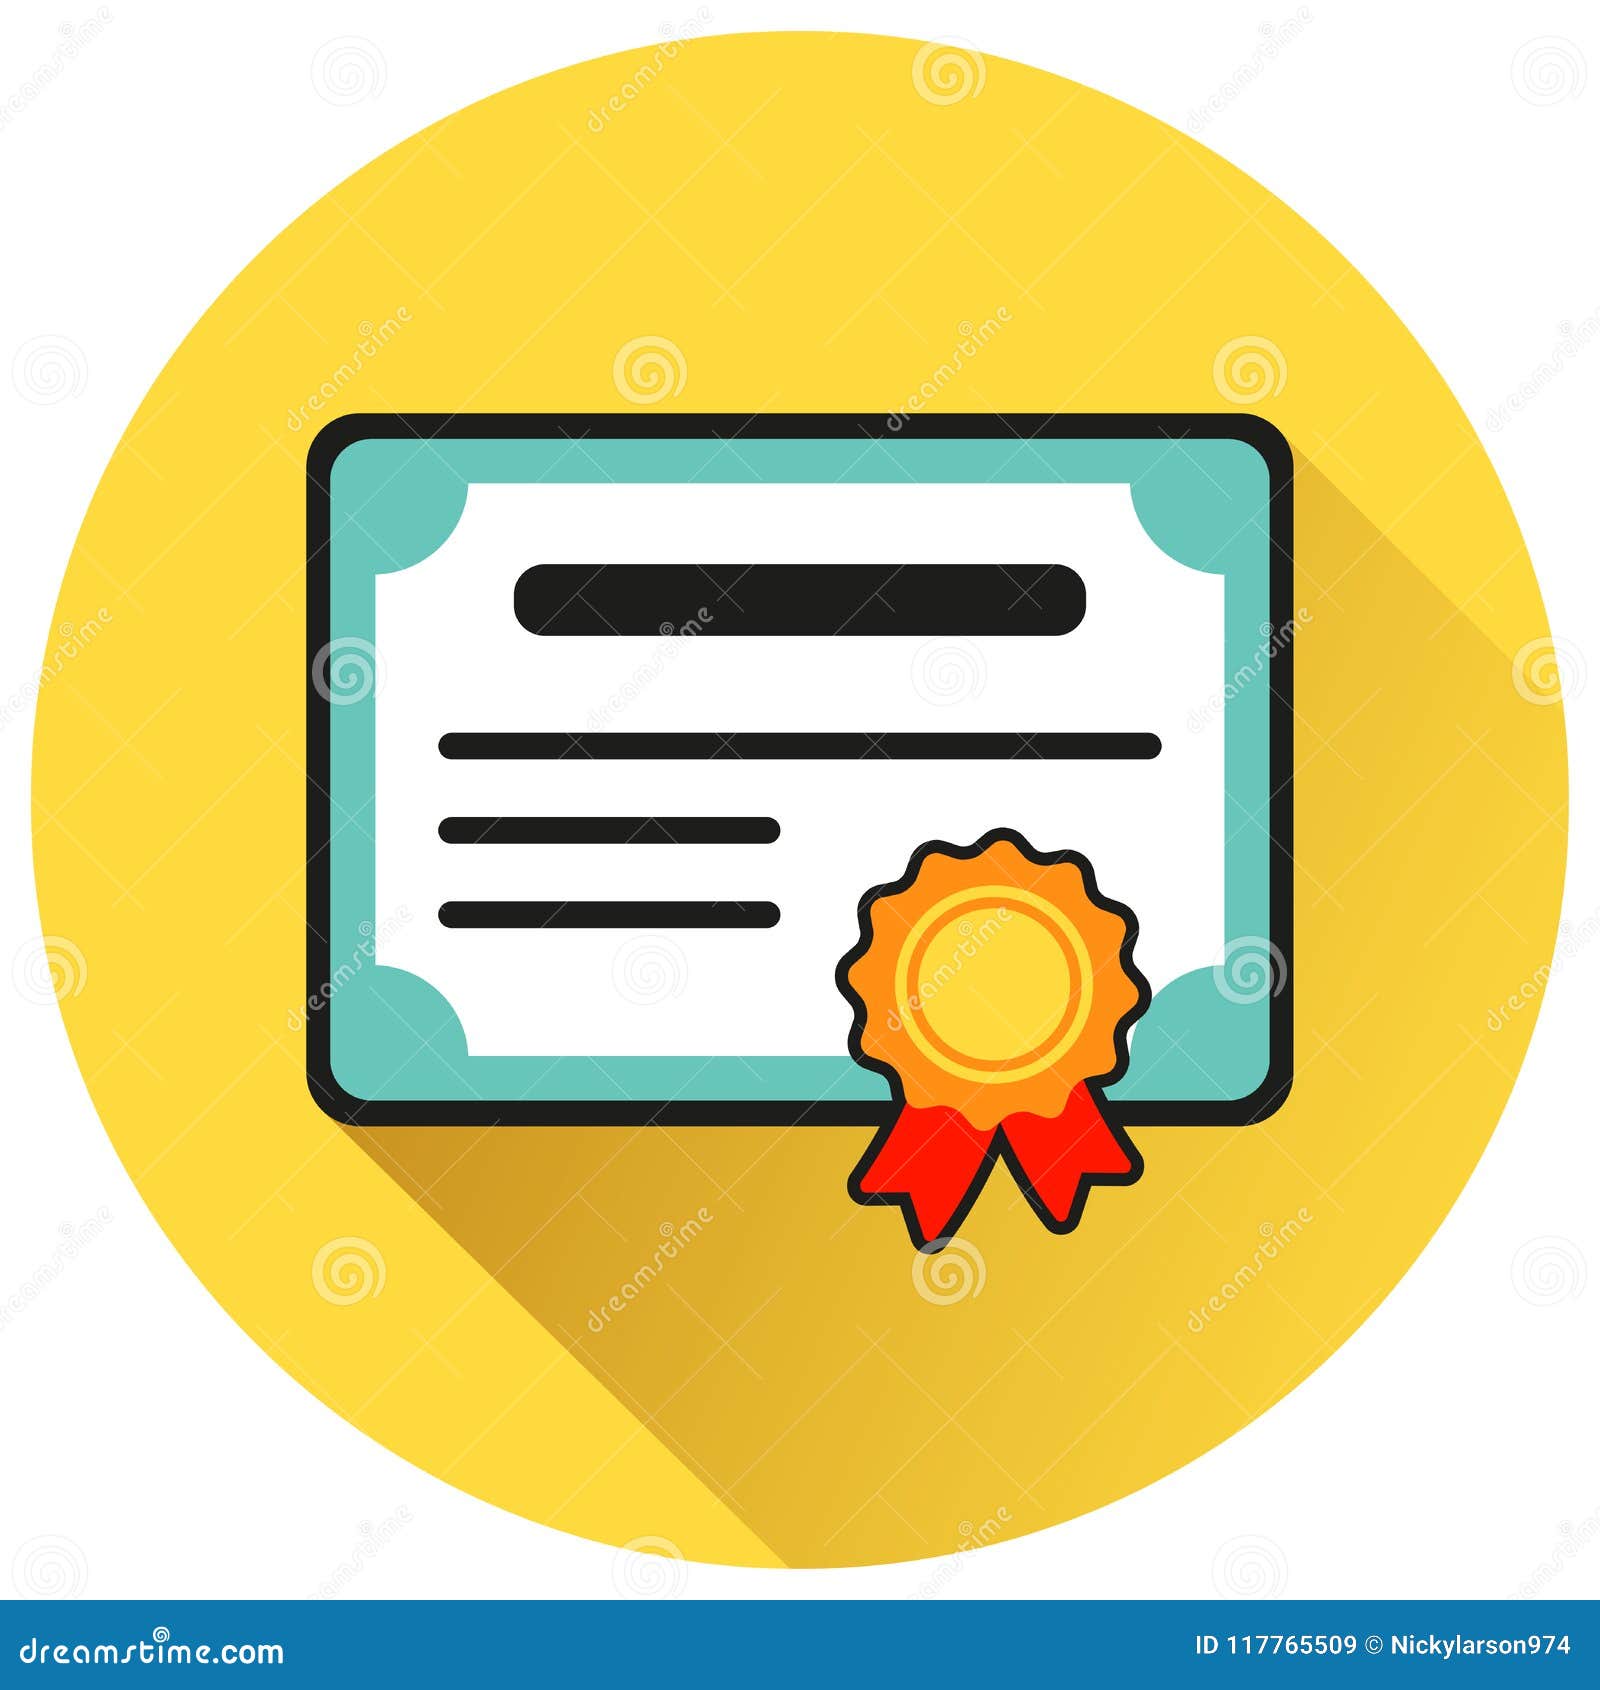 Certificate Circle Yellow Flat Icon Stock Vector - Illustration of ...